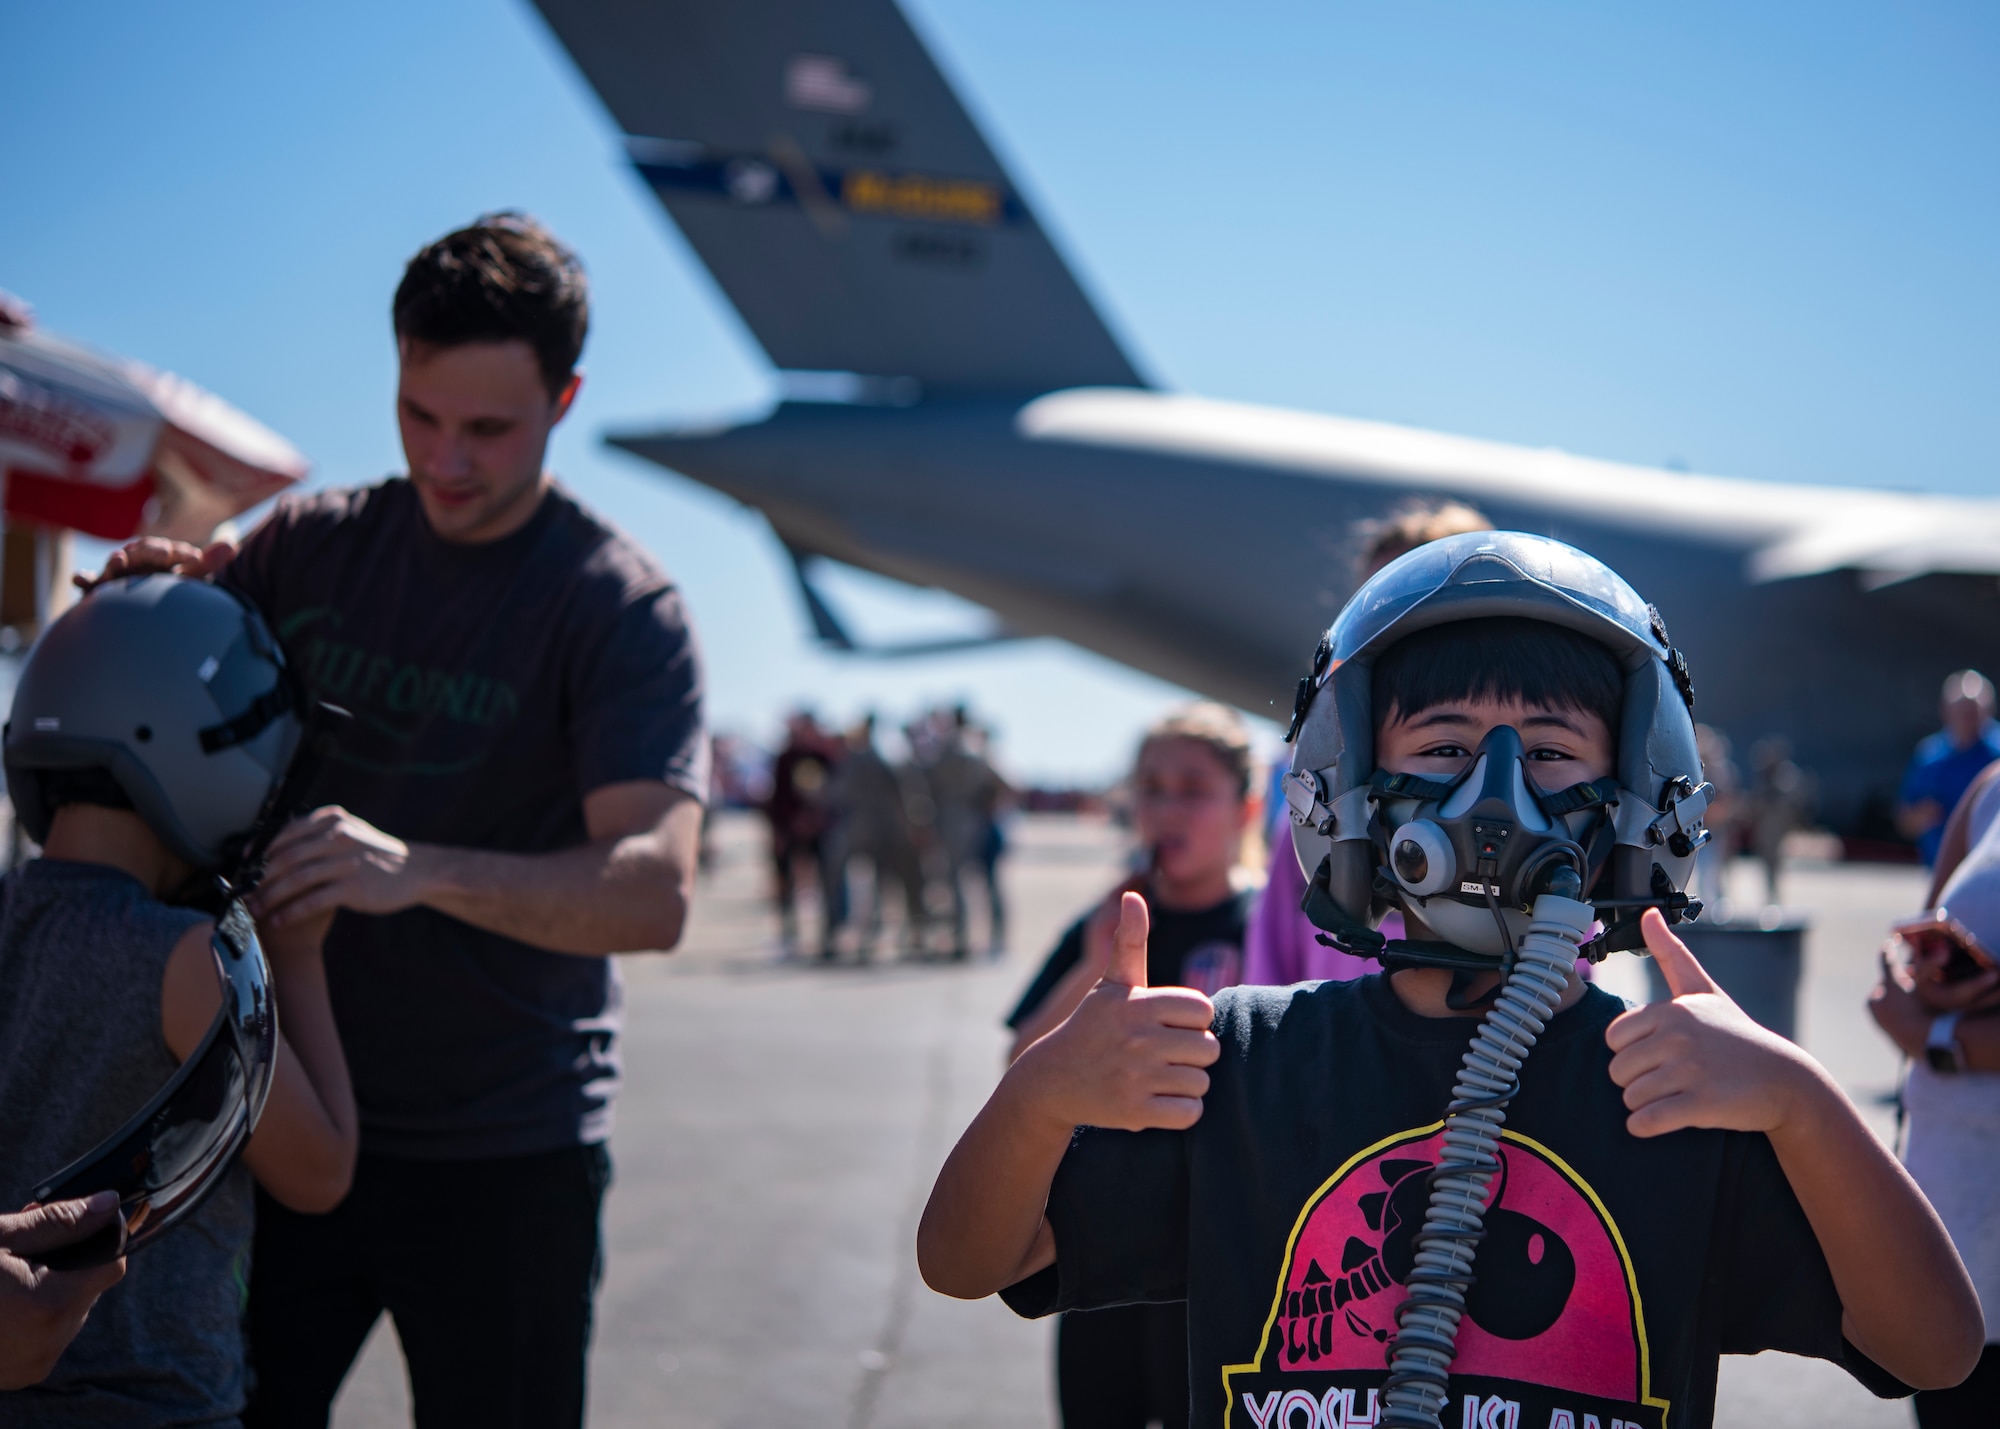 An event goer poses for a picture at the Sheppard Air Force Base Guardians of Freedom Open House and Air Show at Sheppard AFB, Texas, Oct. 27, 2019. The open house and air show is a chance for Sheppard to show and communicate the Air Force's mission as well as Sheppard's specific mission of training, developing and inspiring the next generation of Air Force warriors. (U.S. Air Force photo by Airman 1st Class Pedro Tenorio)